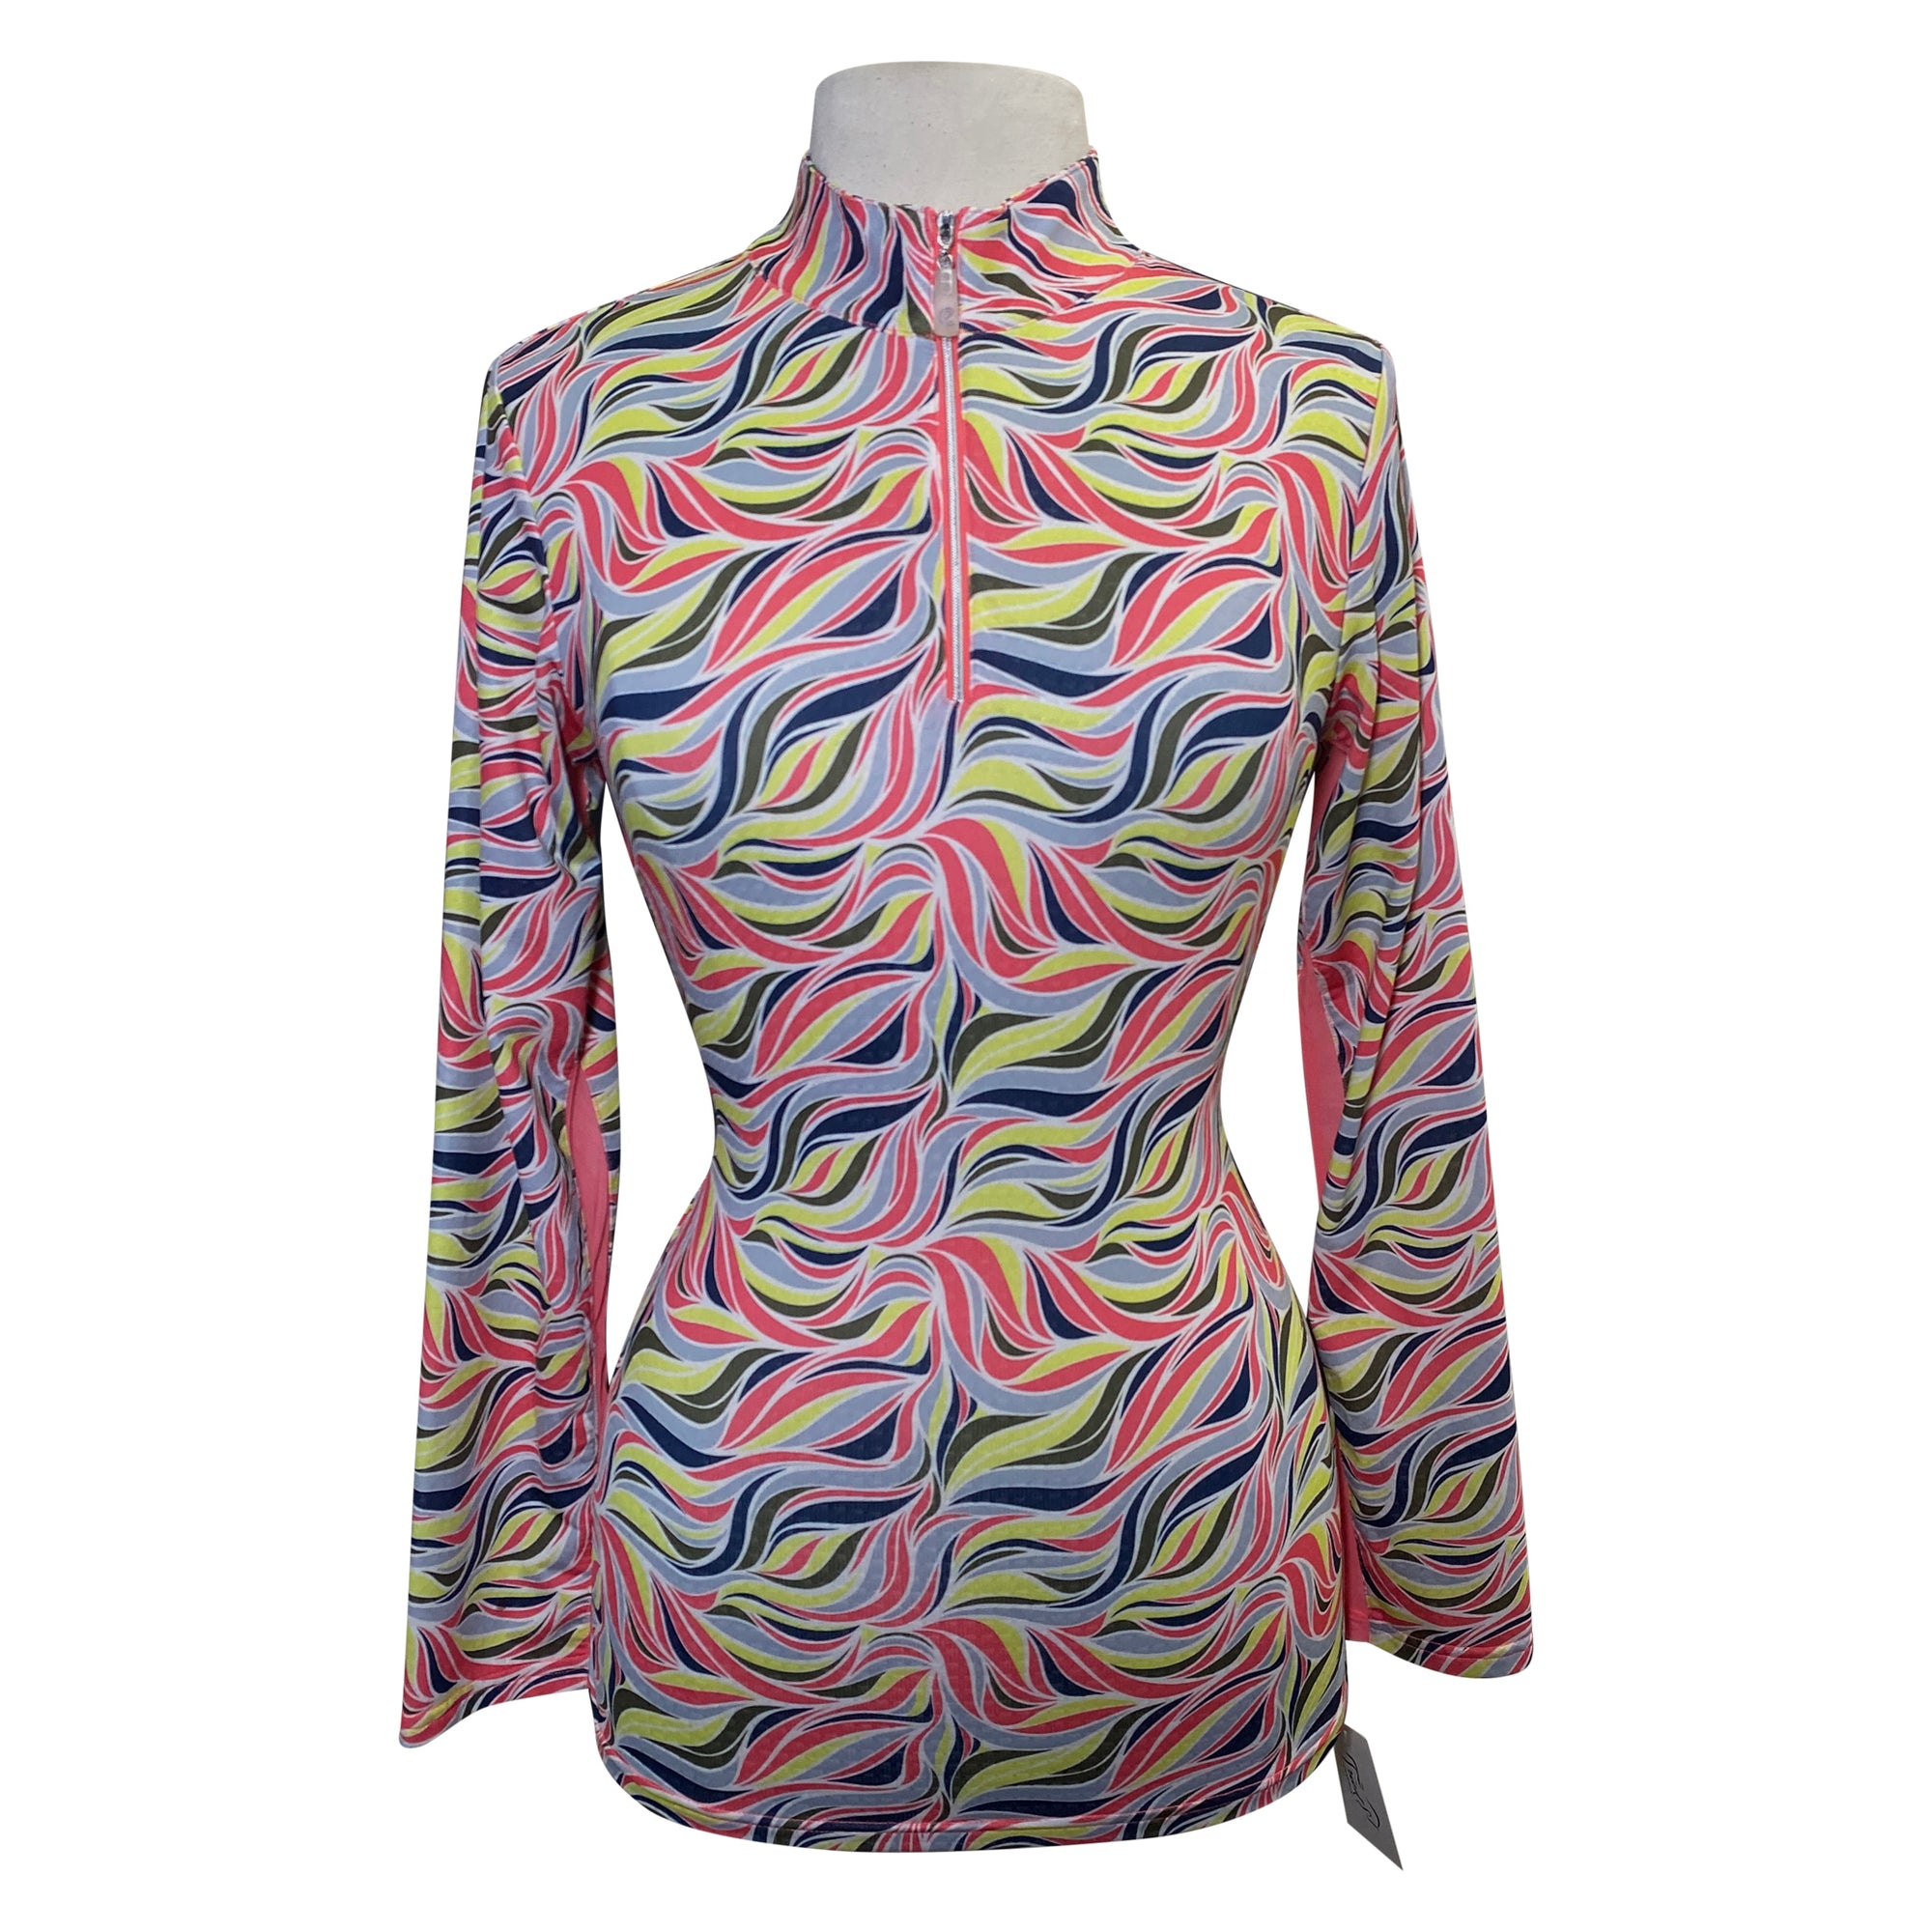 Bette and Court Sunshirt in Multi Waves 